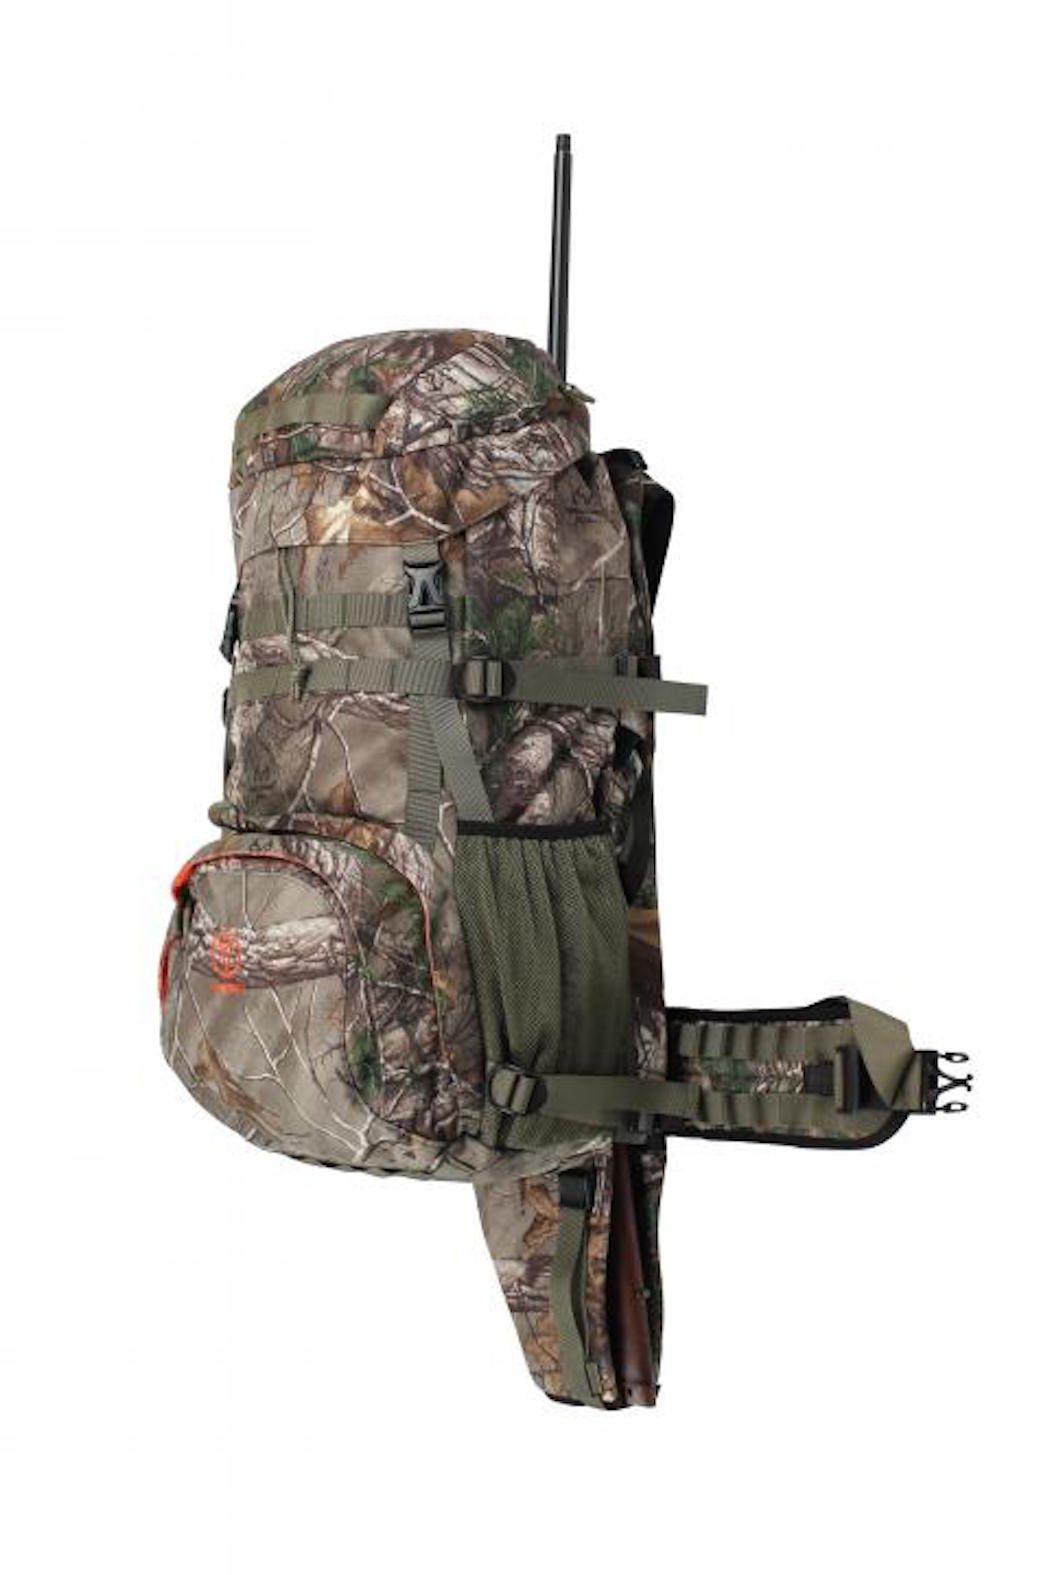 The Vorn Deer 42-Liter Backpack in Realtree Xtra is great for those back-country deer hunts.